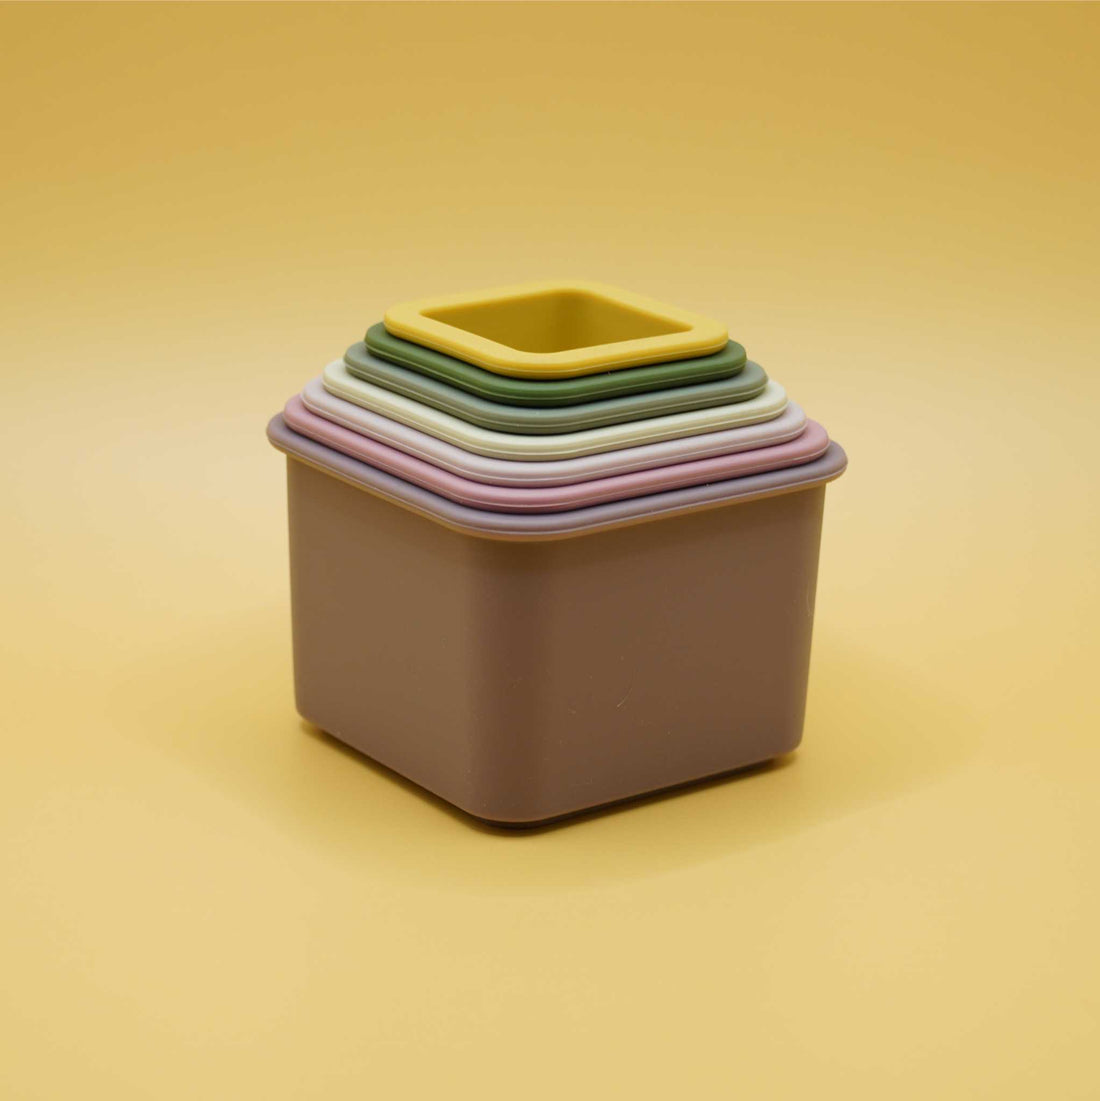 vibrant square silicone stacking cups stacked together